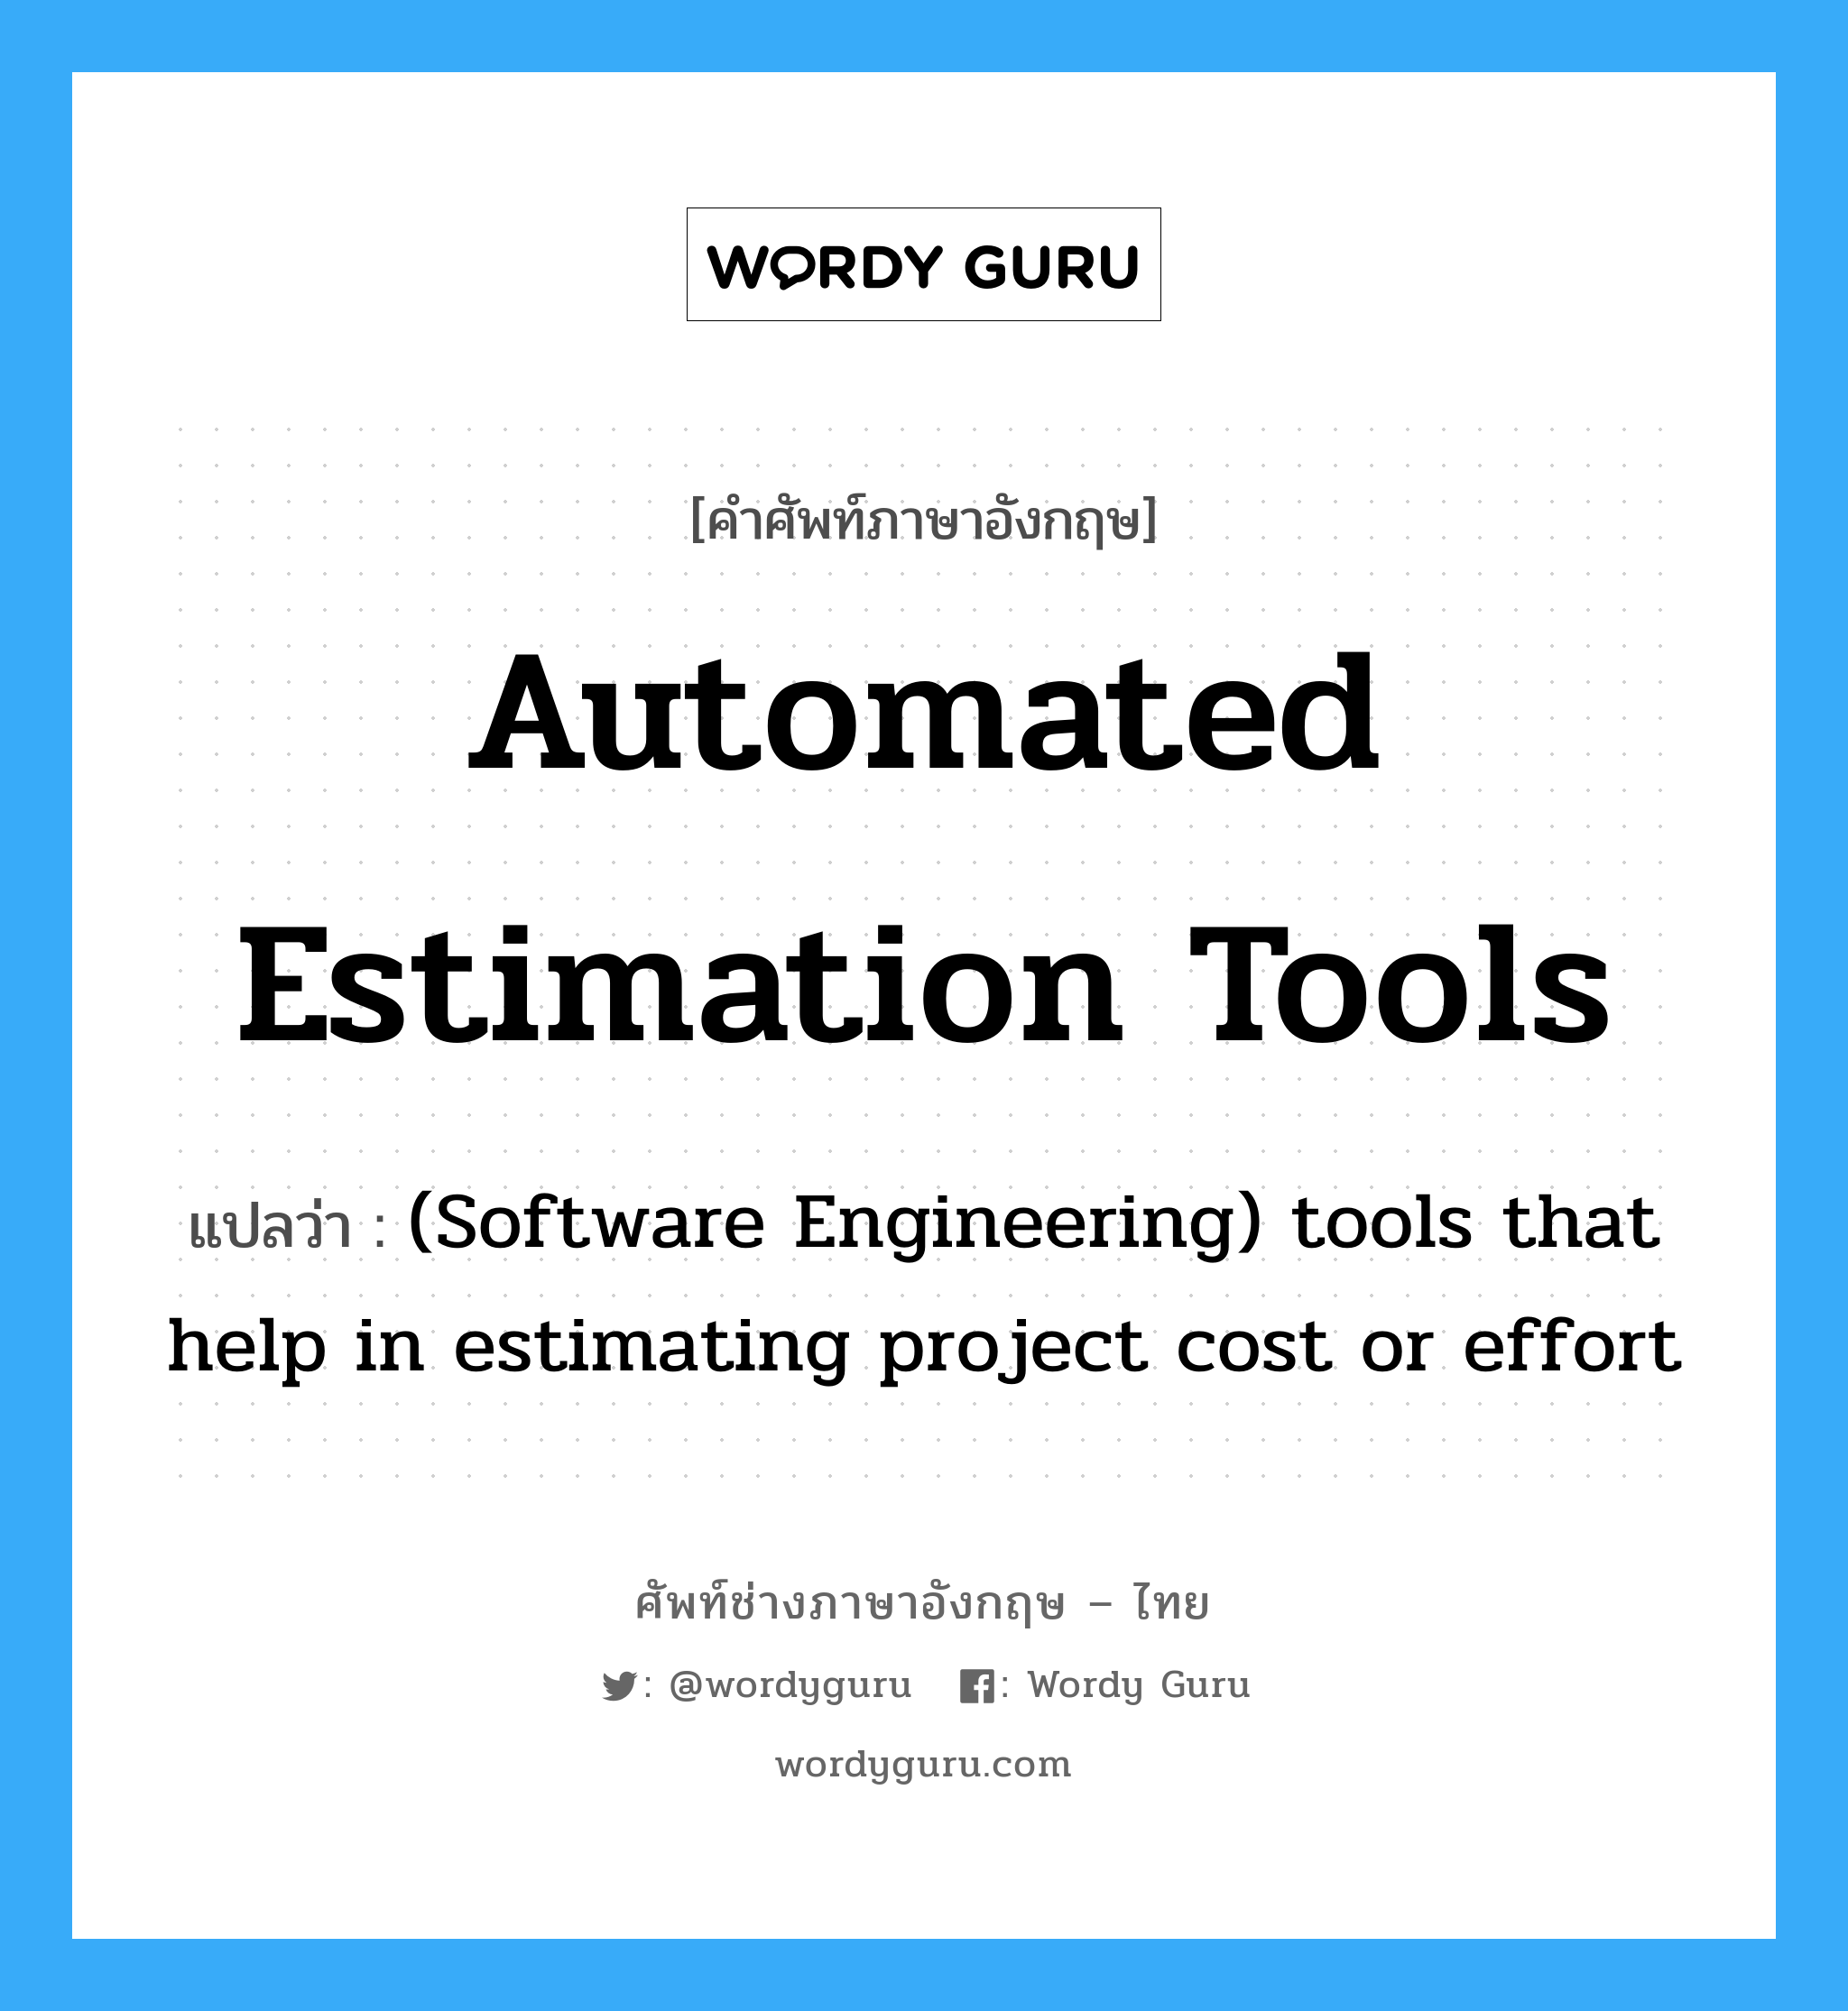 (Software Engineering) tools that help in estimating project cost or effort ภาษาอังกฤษ?, คำศัพท์ช่างภาษาอังกฤษ - ไทย (Software Engineering) tools that help in estimating project cost or effort คำศัพท์ภาษาอังกฤษ (Software Engineering) tools that help in estimating project cost or effort แปลว่า Automated estimation tools